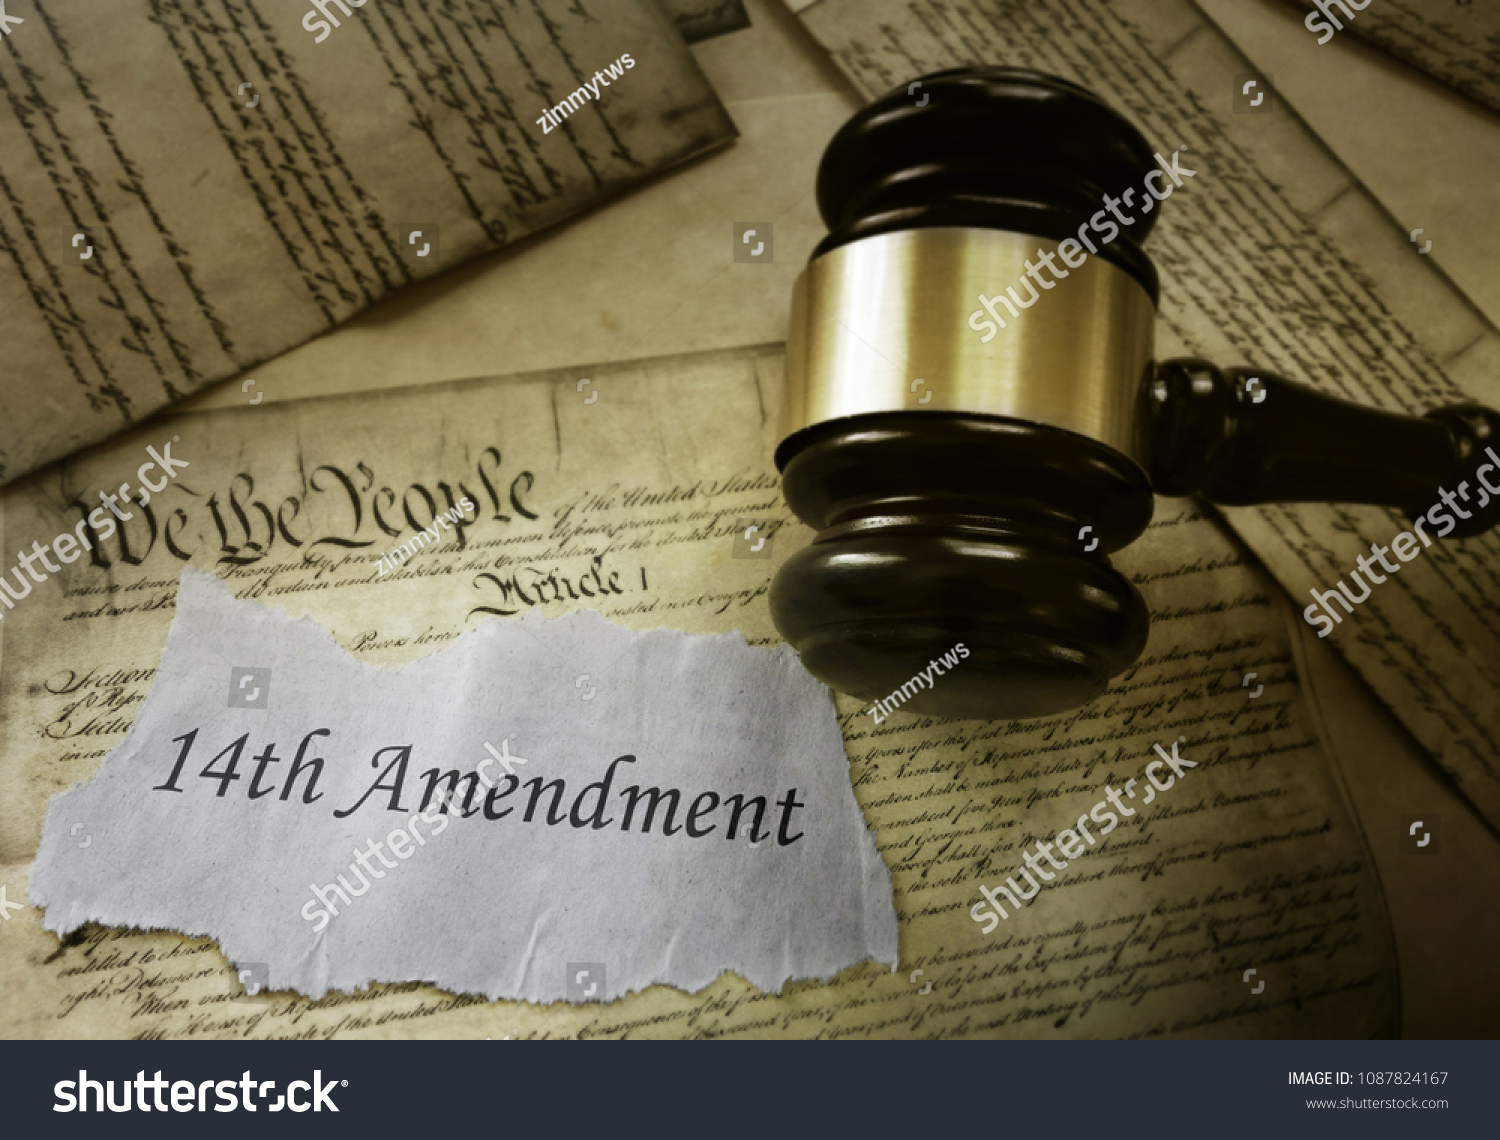 14th Amendment news headline on pages of the US Consitution                                #1087824167